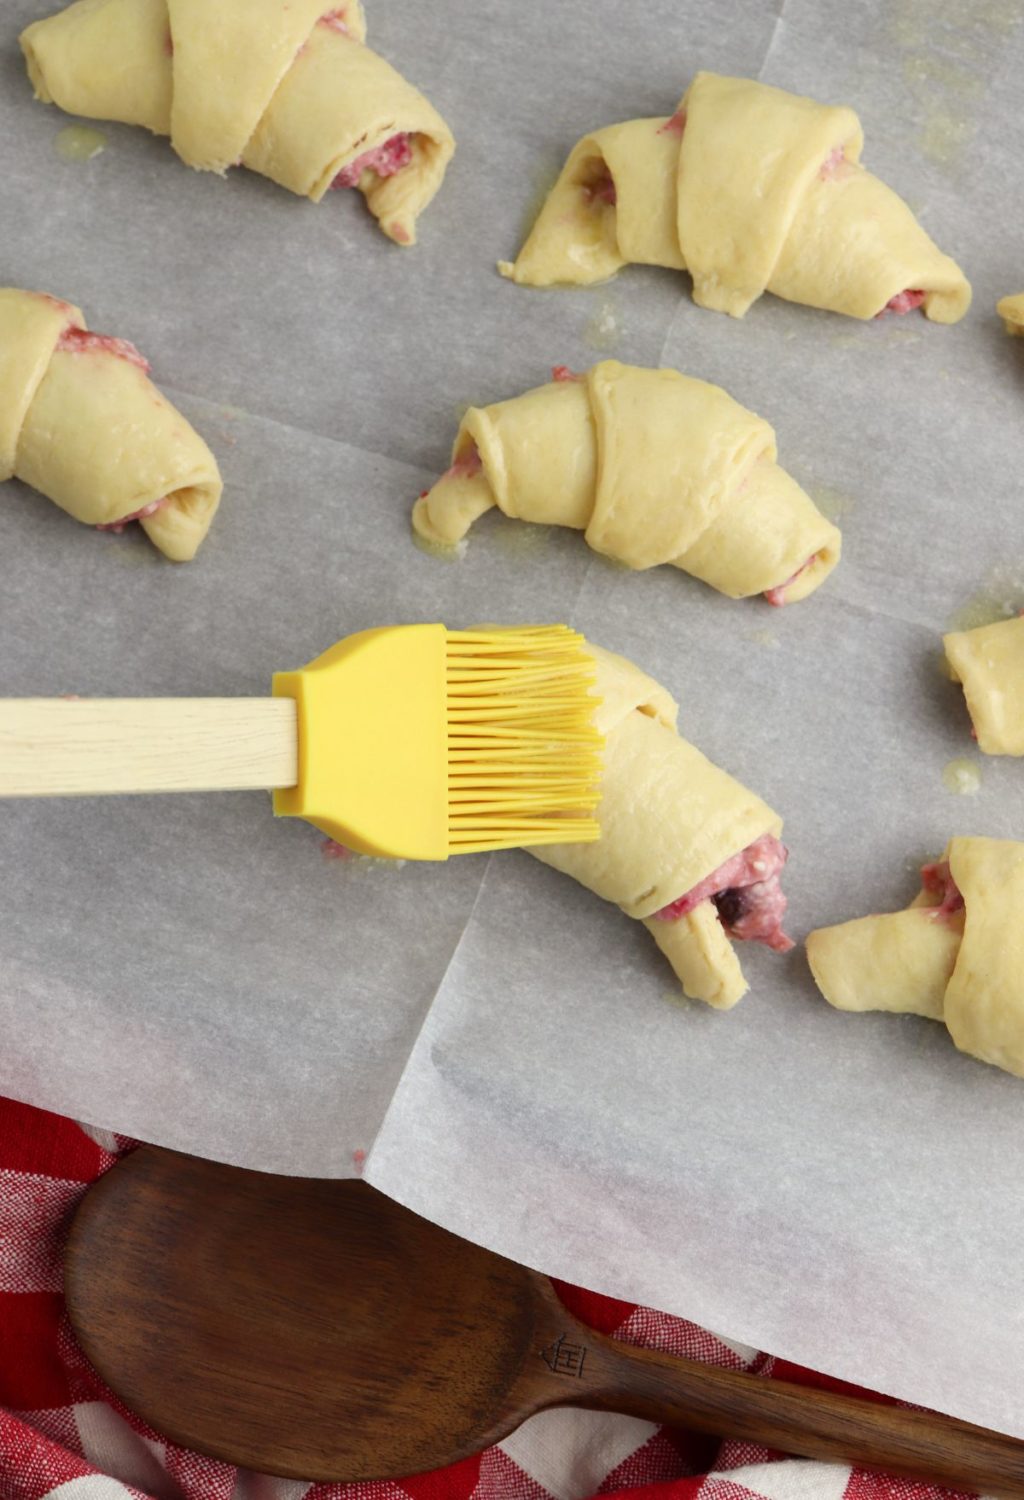 Strawberry crescent rolls on a baking sheet with a yellow spatula.